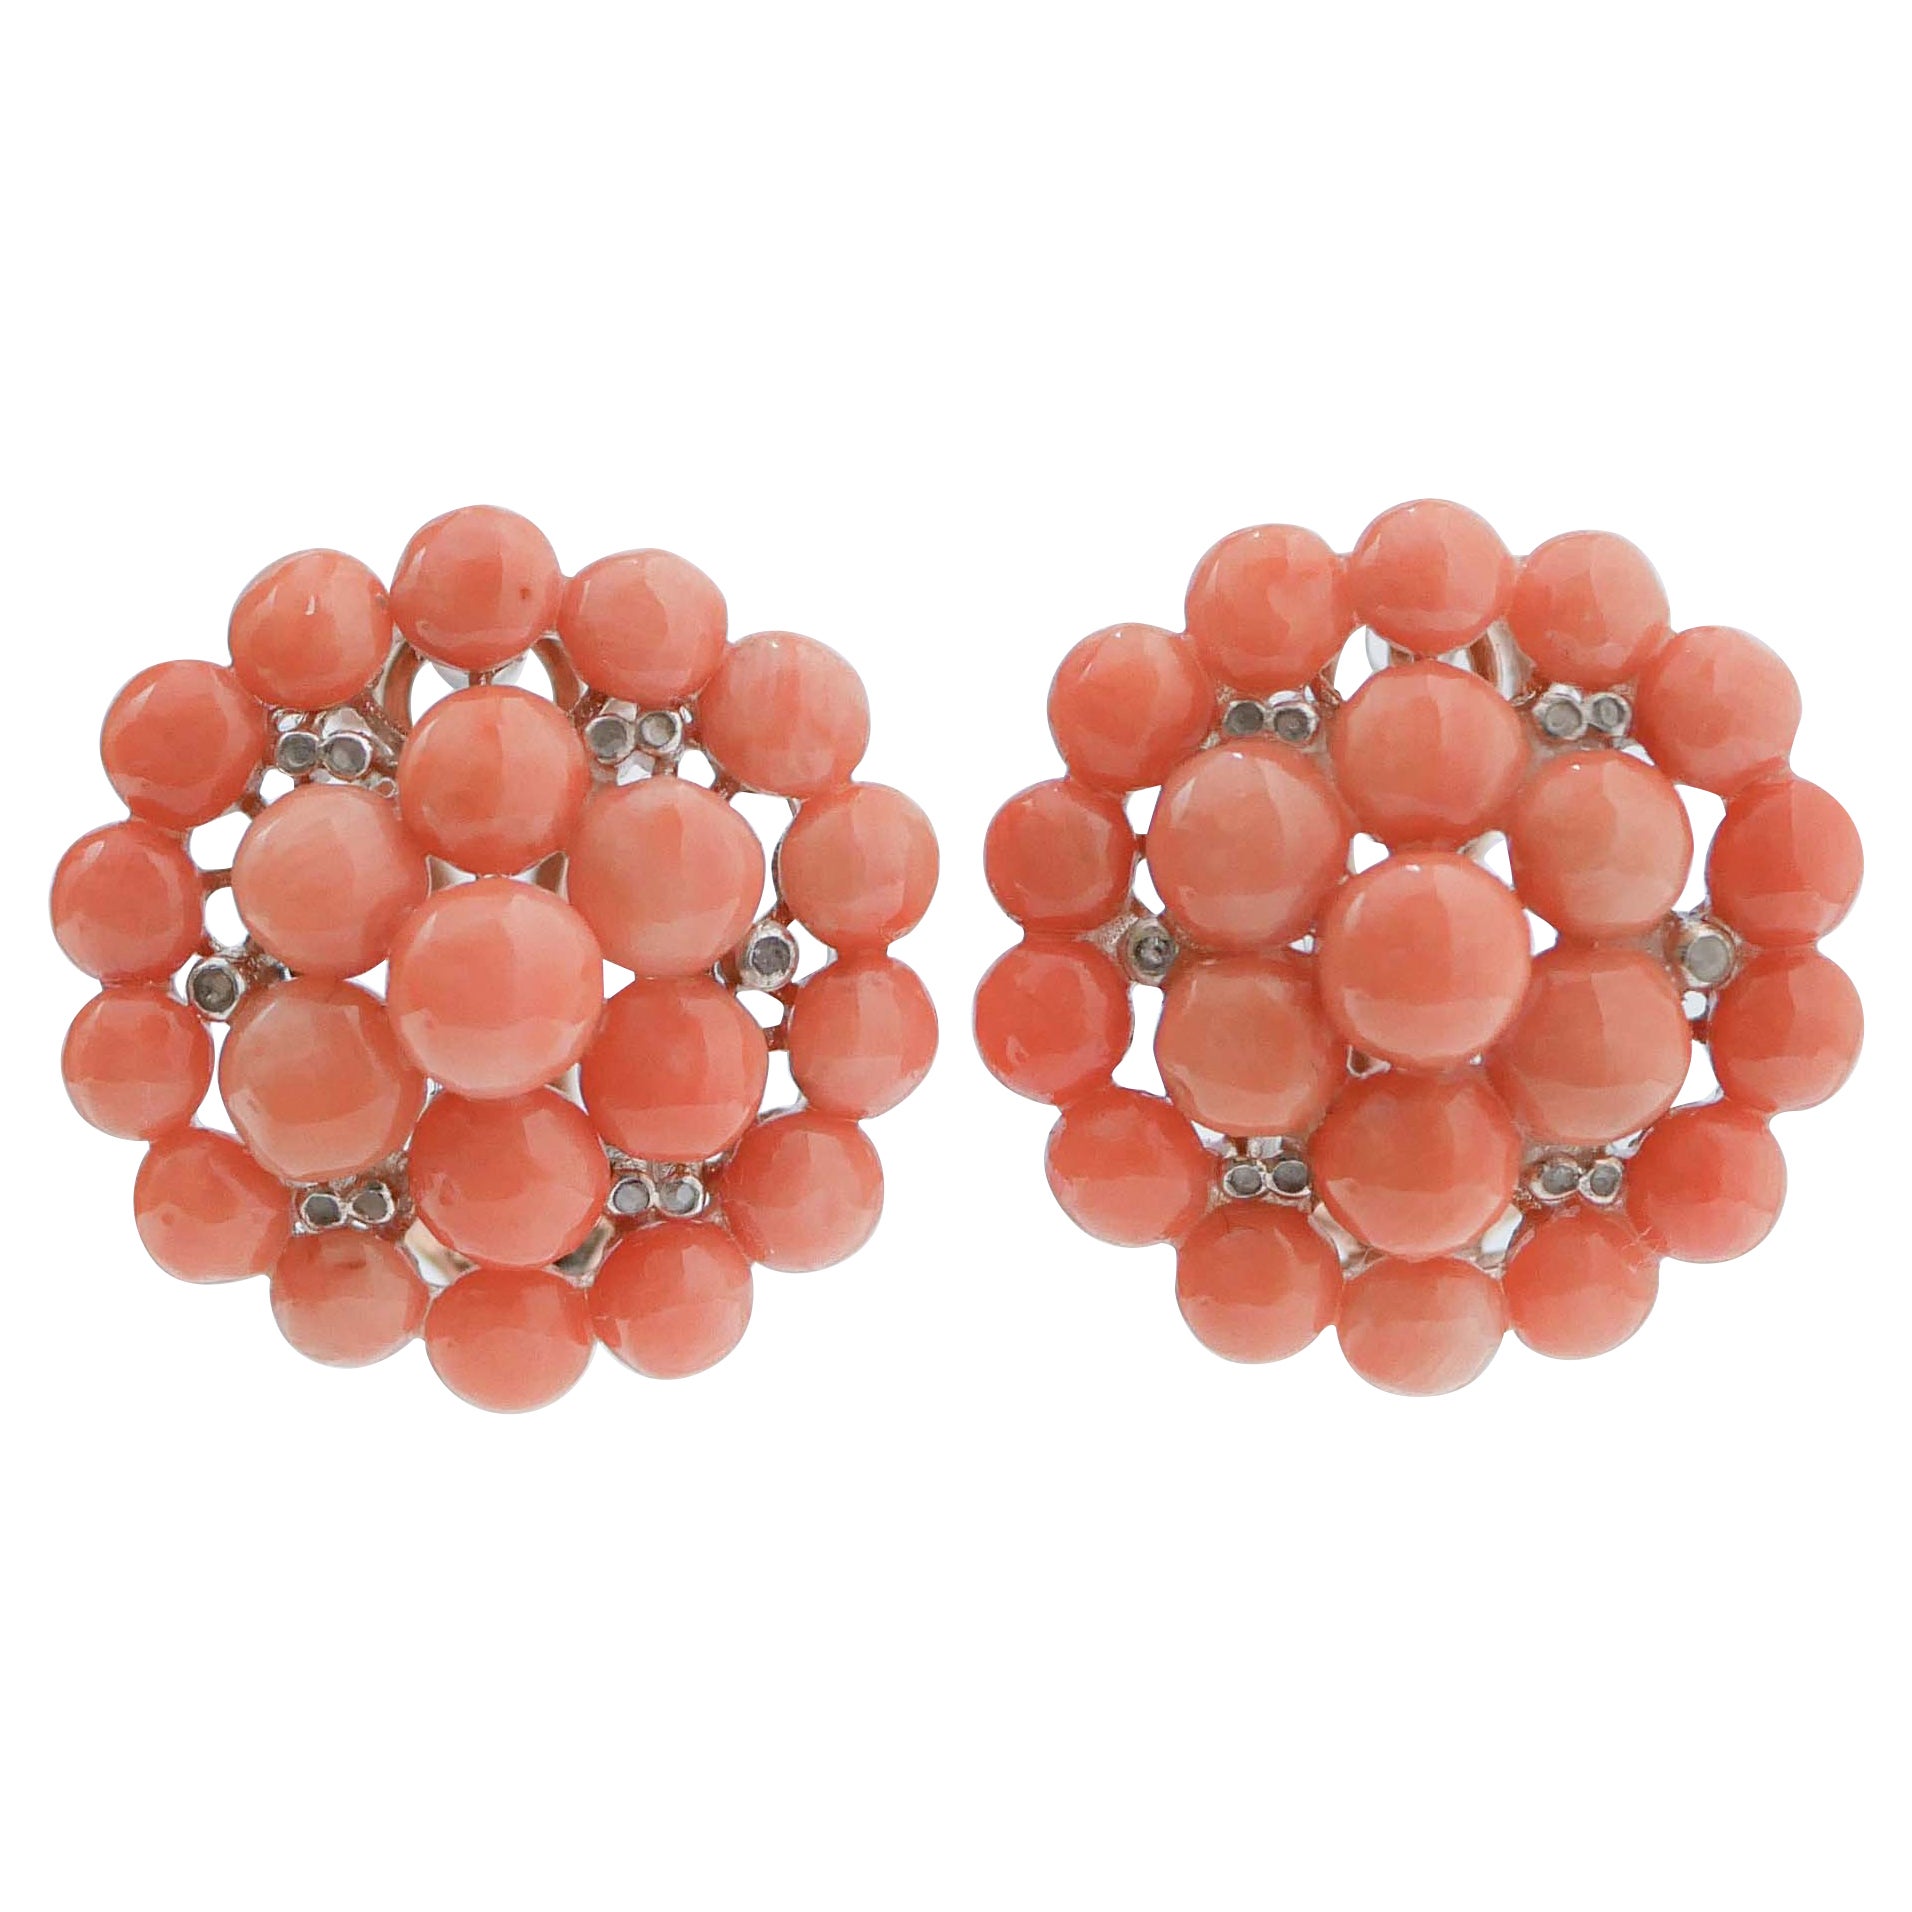 Coral, Diamonds, Rose Gold and Silver Earrings.